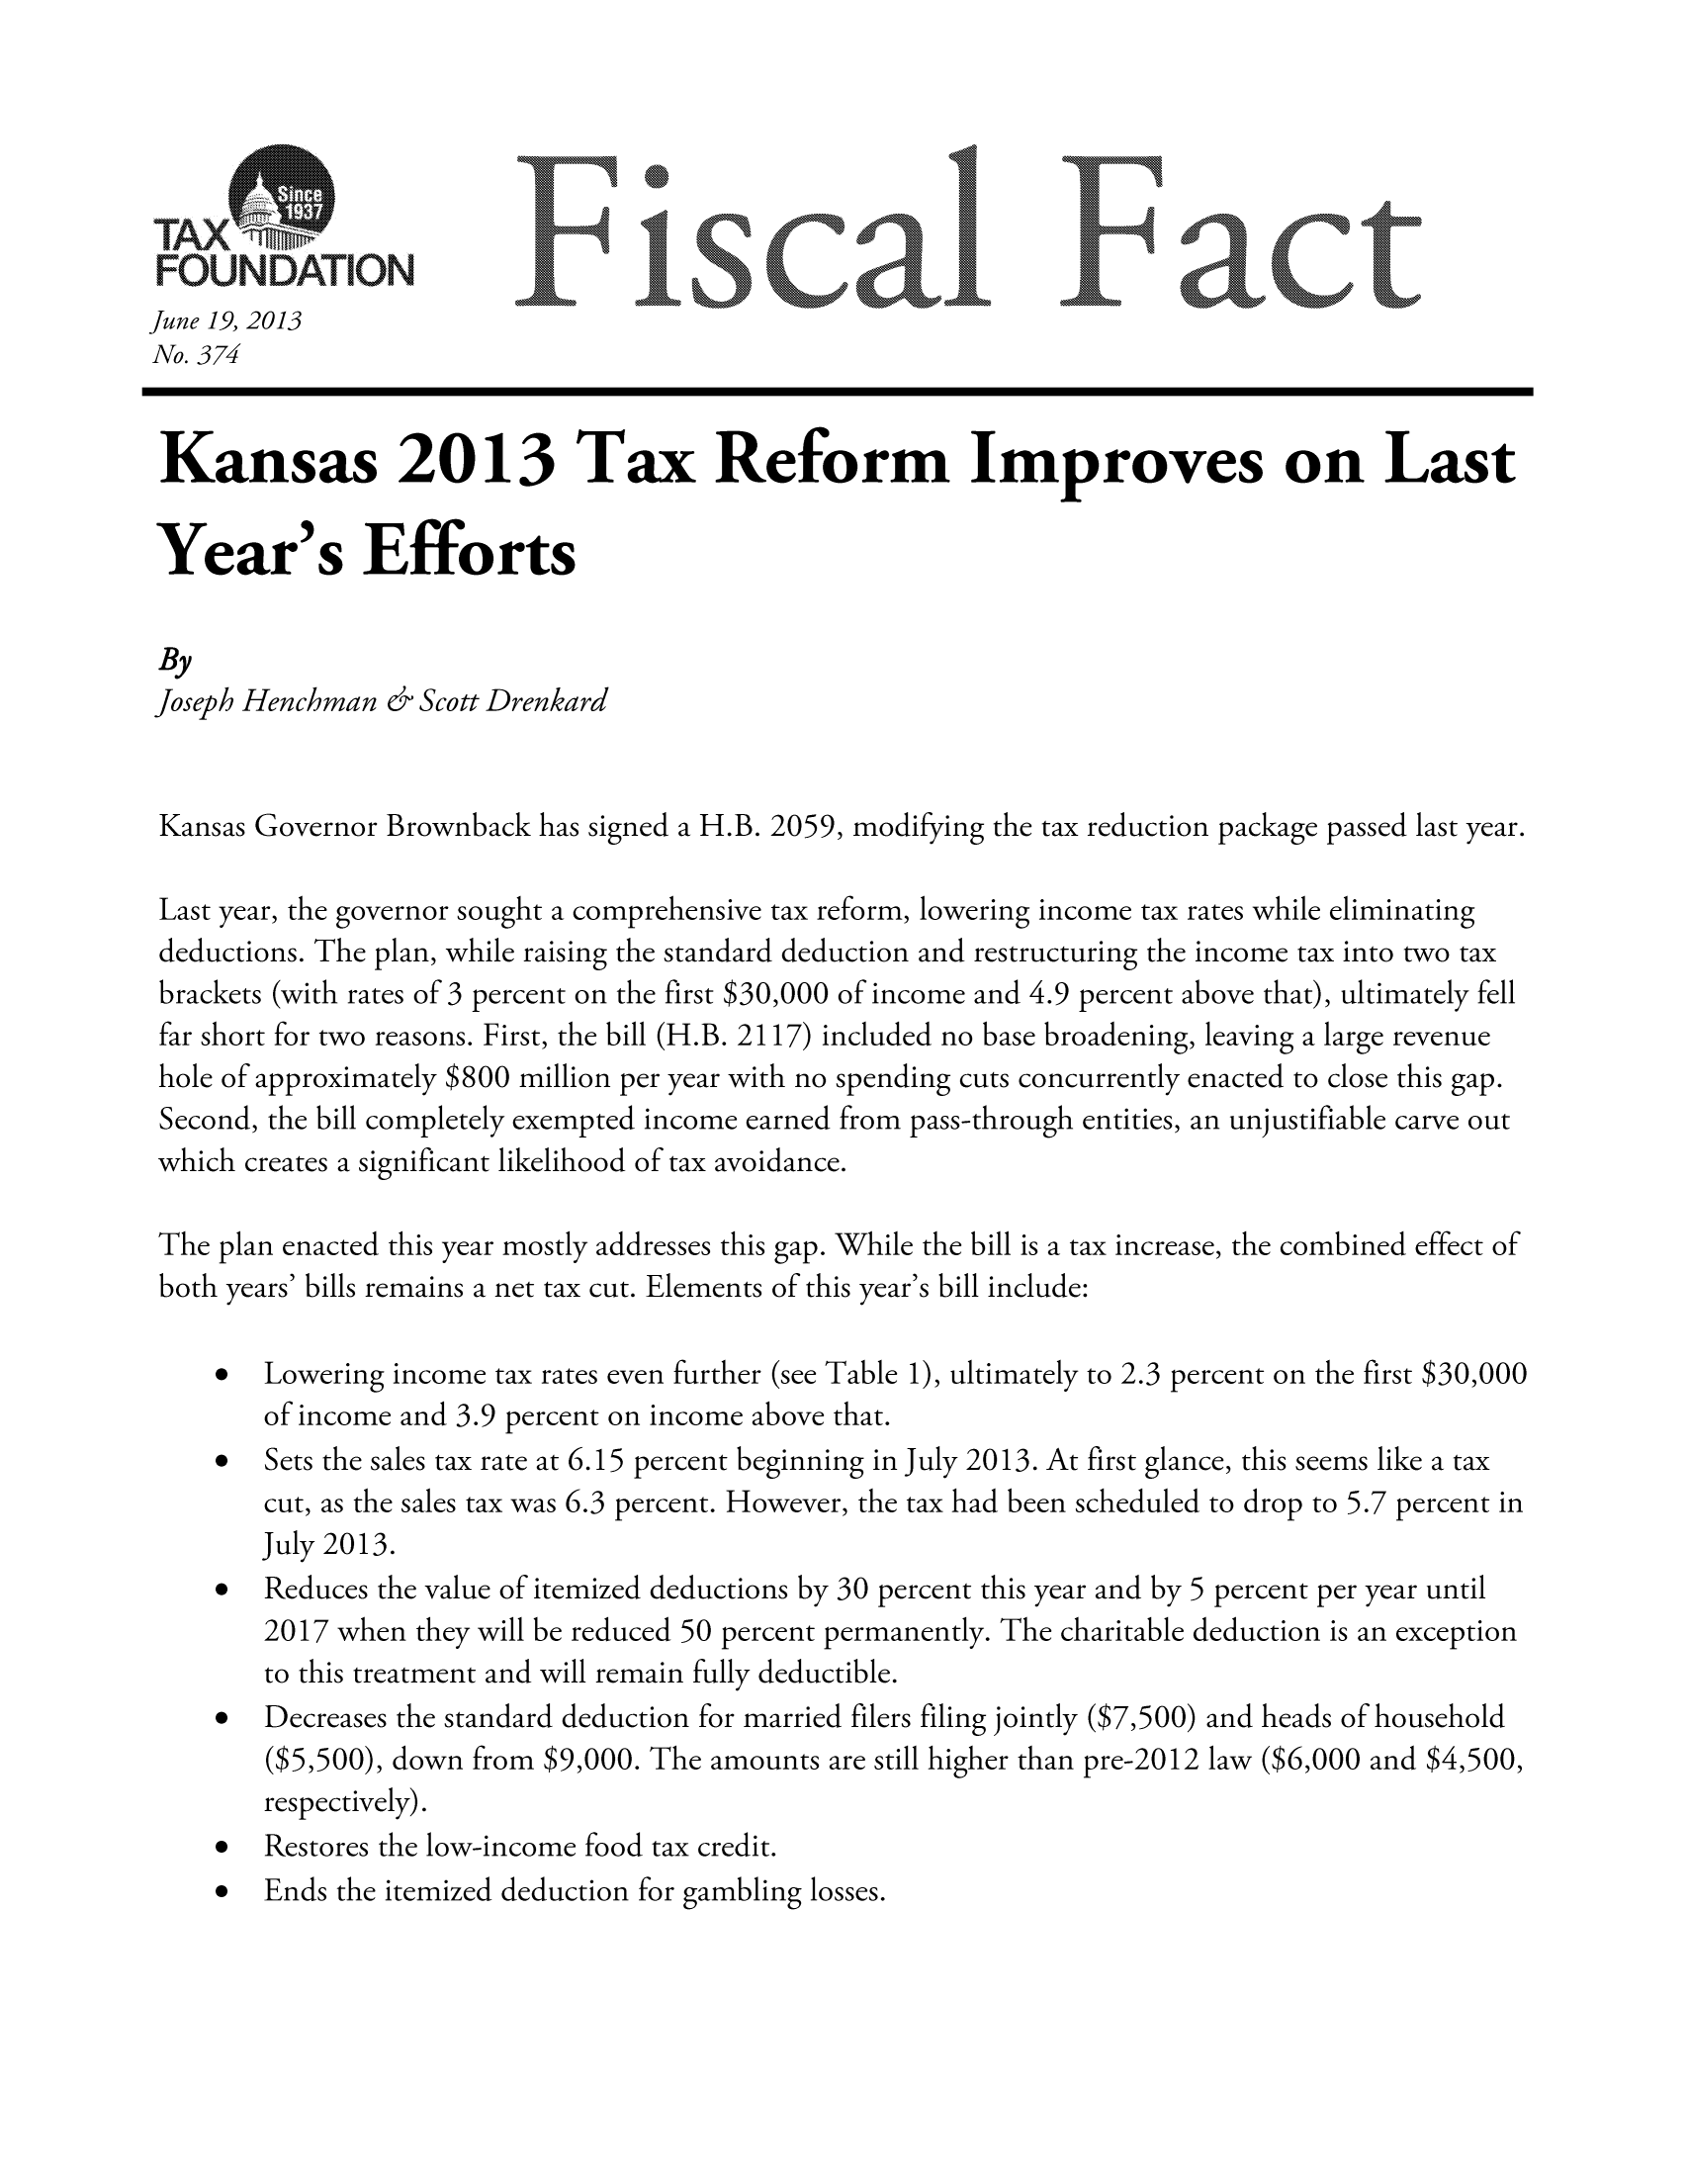 handle is hein.taxfoundation/ffdhexz0001 and id is 1 raw text is: t UsNOAT, ON]F                      scal ]Fact
June 19, 2013
No. 374
Kansas 2013 Tax Reform Improves on Last
Year's Efforts
By
Joseph Henchman & Scott Drenkard
Kansas Governor Brownback has signed a H.B. 2059, modifying the tax reduction package passed last year.
Last year, the governor sought a comprehensive tax reform, lowering income tax rates while eliminating
deductions. The plan, while raising the standard deduction and restructuring the income tax into two tax
brackets (with rates of 3 percent on the first $30,000 of income and 4.9 percent above that), ultimately fell
far short for two reasons. First, the bill (H.B. 2117) included no base broadening, leaving a large revenue
hole of approximately $800 million per year with no spending cuts concurrently enacted to close this gap.
Second, the bill completely exempted income earned from pass-through entities, an unjustifiable carve out
which creates a significant likelihood of tax avoidance.
The plan enacted this year mostly addresses this gap. While the bill is a tax increase, the combined effect of
both years' bills remains a net tax cut. Elements of this year's bill include:
 Lowering income tax rates even further (see Table 1), ultimately to 2.3 percent on the first $30,000
of income and 3.9 percent on income above that.
  Sets the sales tax rate at 6.15 percent beginning in July 2013. At first glance, this seems like a tax
cut, as the sales tax was 6.3 percent. However, the tax had been scheduled to drop to 5.7 percent in
July 2013.
  Reduces the value of itemized deductions by 30 percent this year and by 5 percent per year until
2017 when they will be reduced 50 percent permanently. The charitable deduction is an exception
to this treatment and will remain fully deductible.
* Decreases the standard deduction for married fliers filing jointly ($7,500) and heads of household
($5,500), down from $9,000. The amounts are still higher than pre-2012 law ($6,000 and $4,500,
respectively).
* Restores the low-income food tax credit.
* Ends the itemized deduction for gambling losses.


